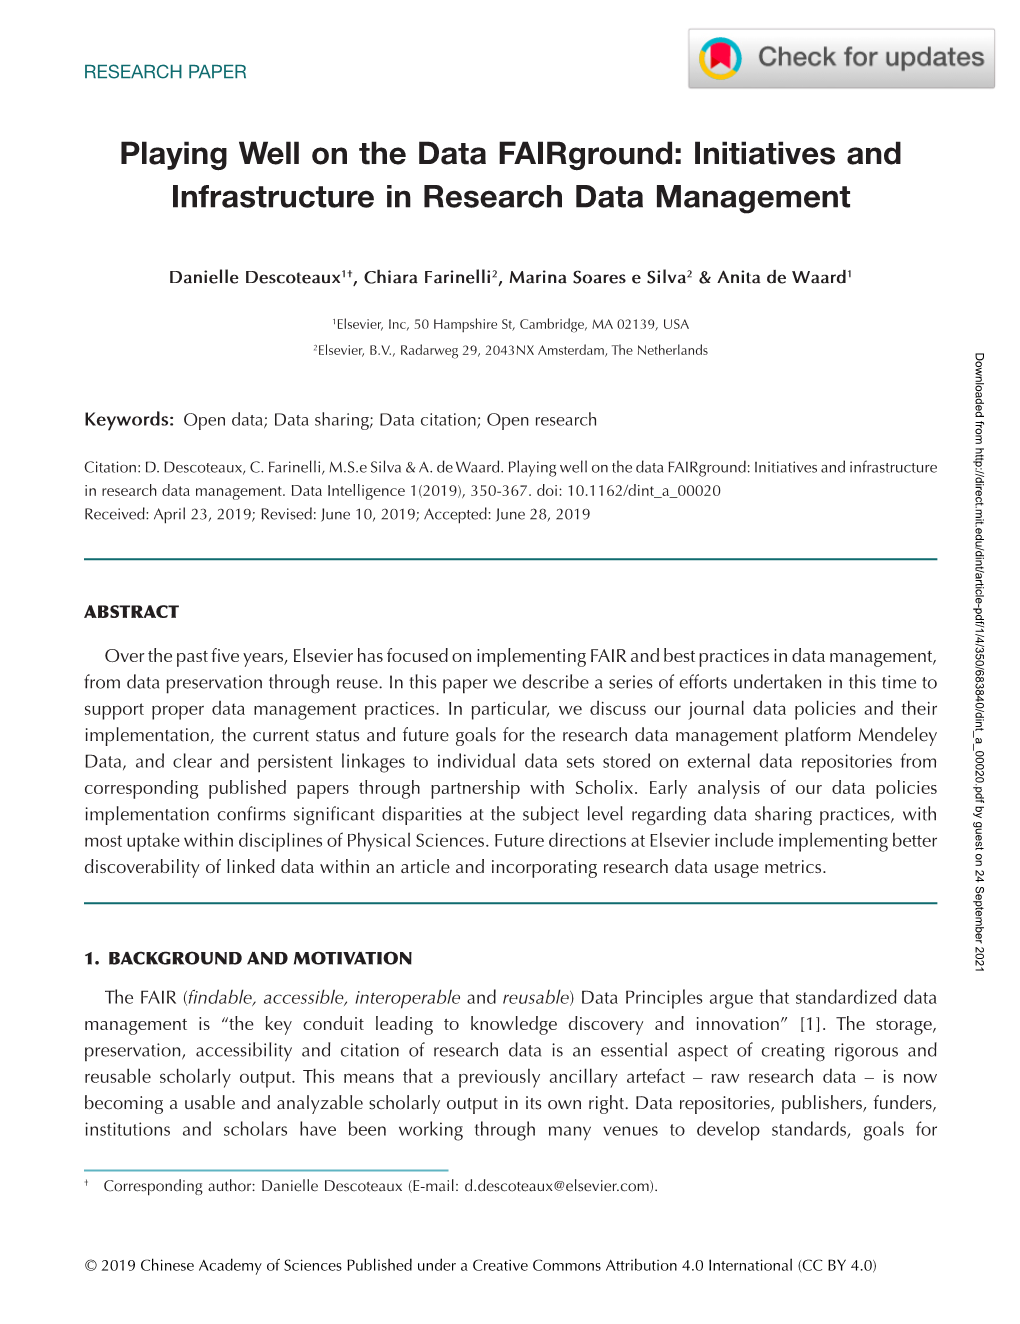 Playing Well on the Data Fairground: Initiatives and Infrastructure in Research Data Management